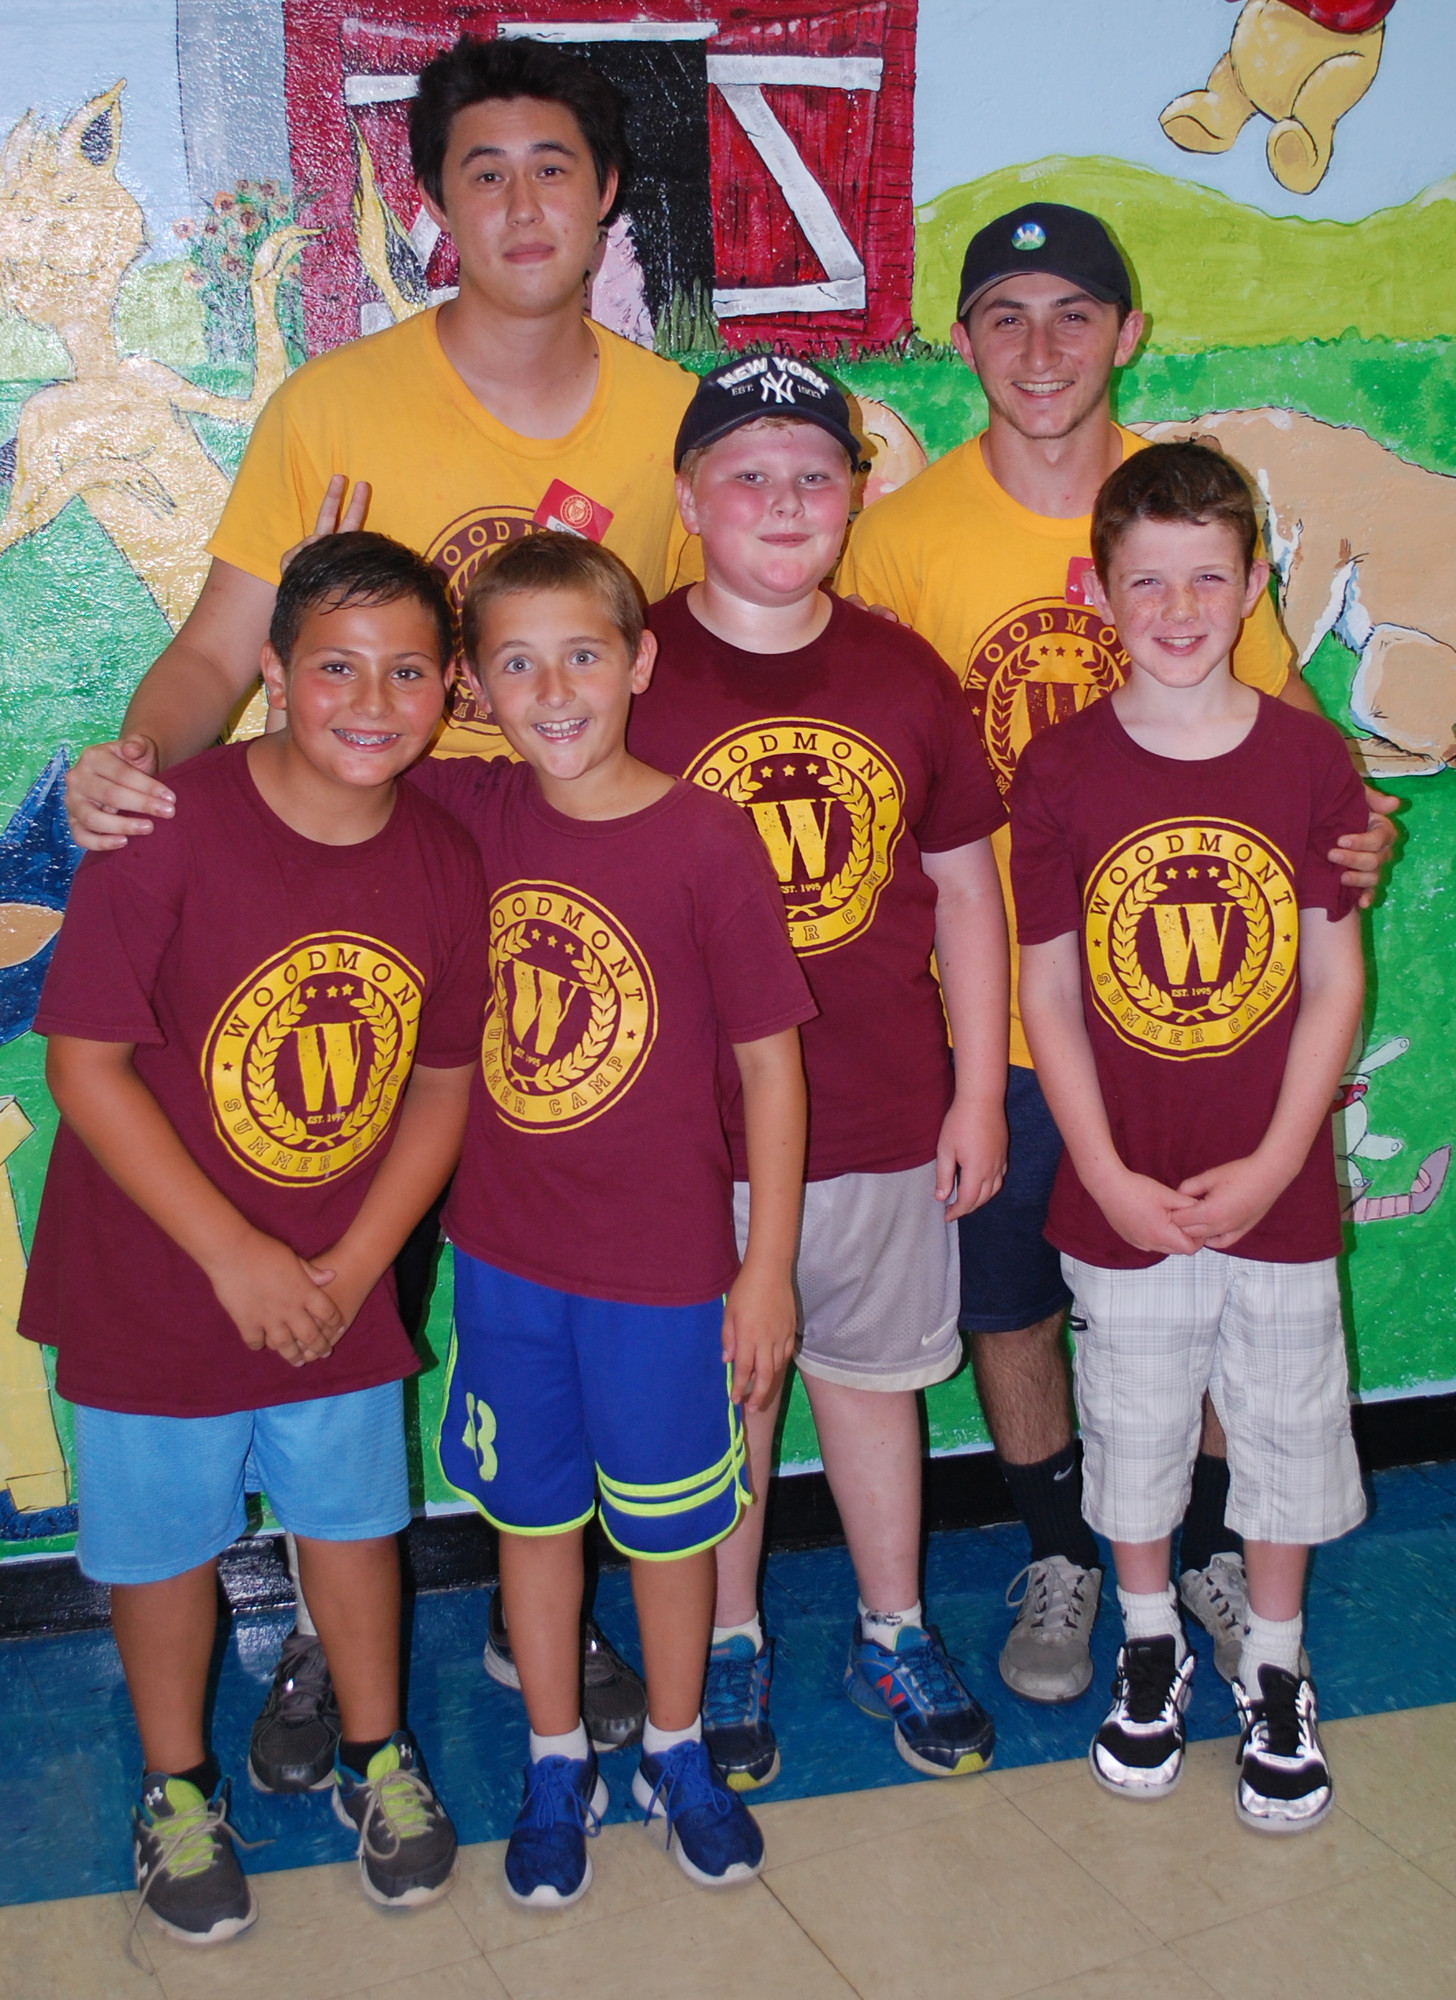 Counselors Corey Sweeney and Zach Diaks with some of their campers, including Jake Borgese, of Wantagh, and Matt Martorano, John Flock and Jake Quinn, all of Seaford.